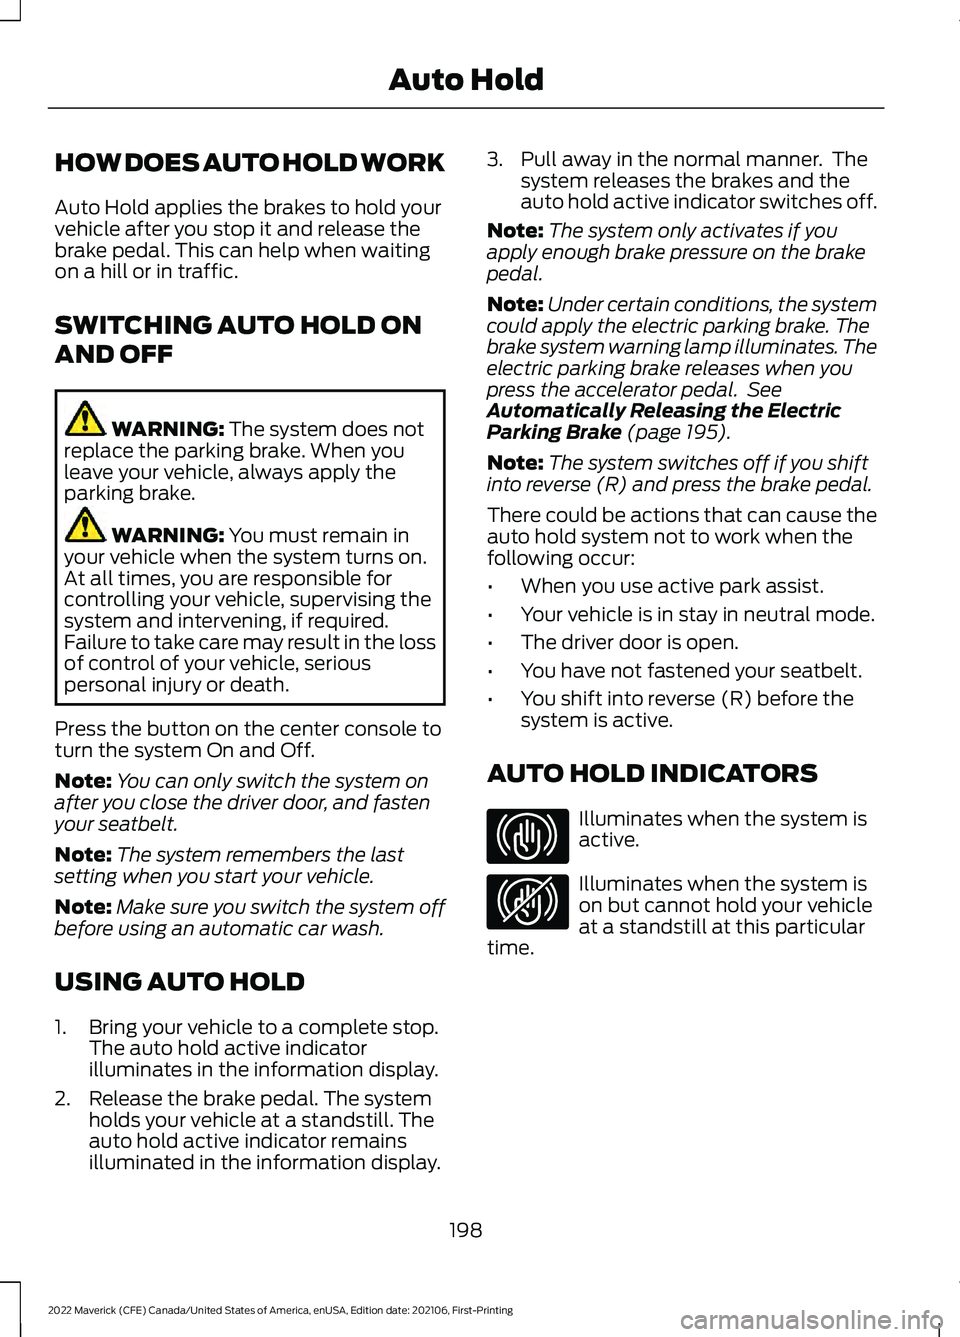 FORD MAVERICK 2022 Owners Manual HOW DOES AUTO HOLD WORK
Auto Hold applies the brakes to hold your
vehicle after you stop it and release the
brake pedal. This can help when waiting
on a hill or in traffic.
SWITCHING AUTO HOLD ON
AND 